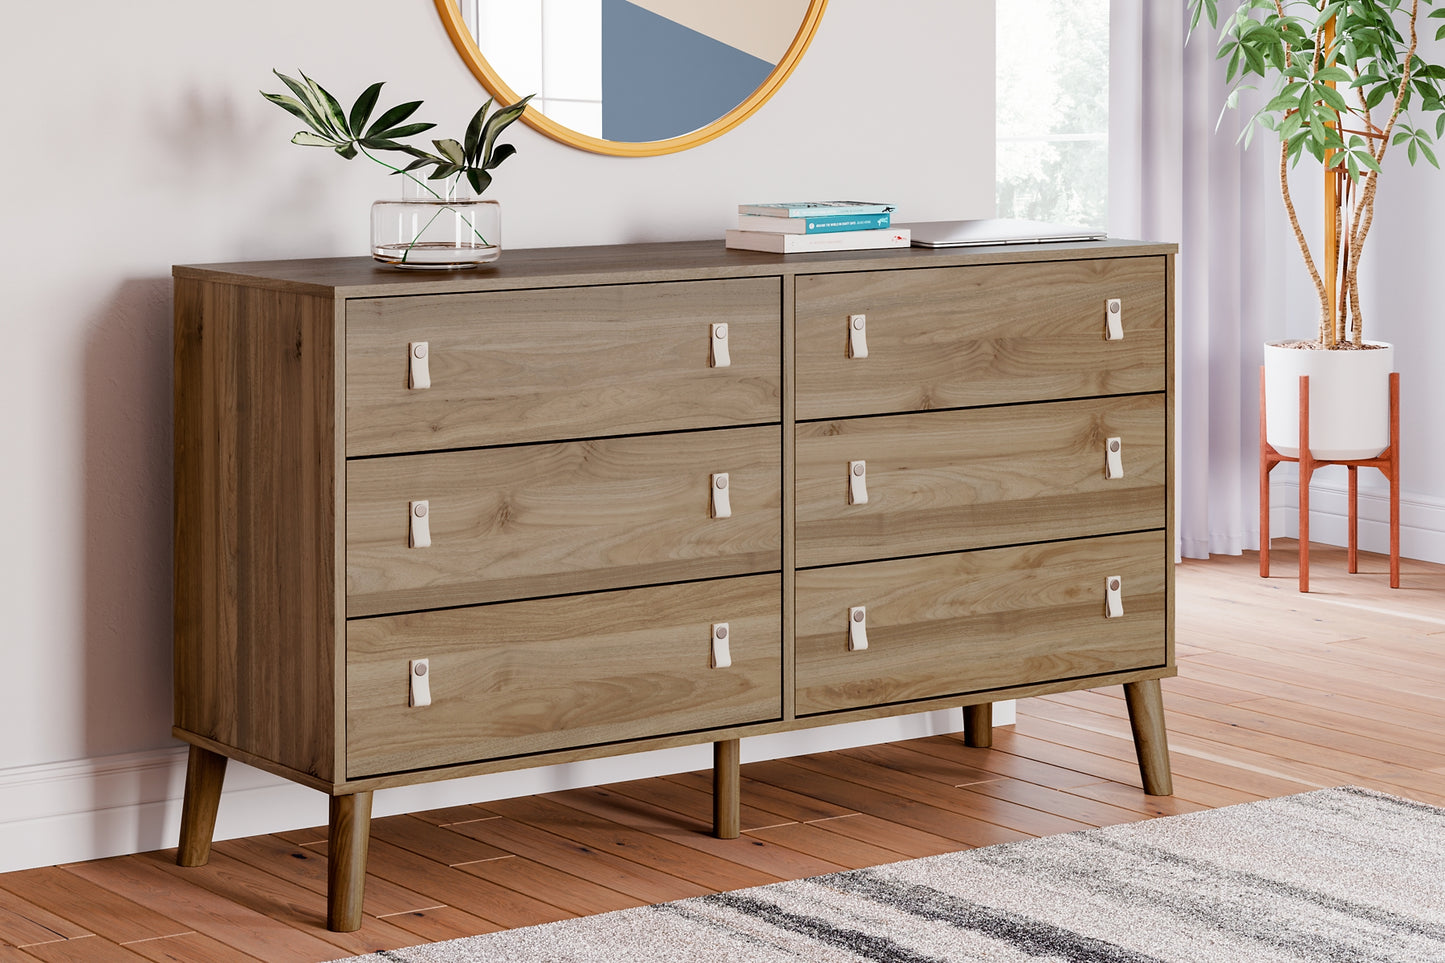 Aprilyn Queen Panel Bed with Dresser